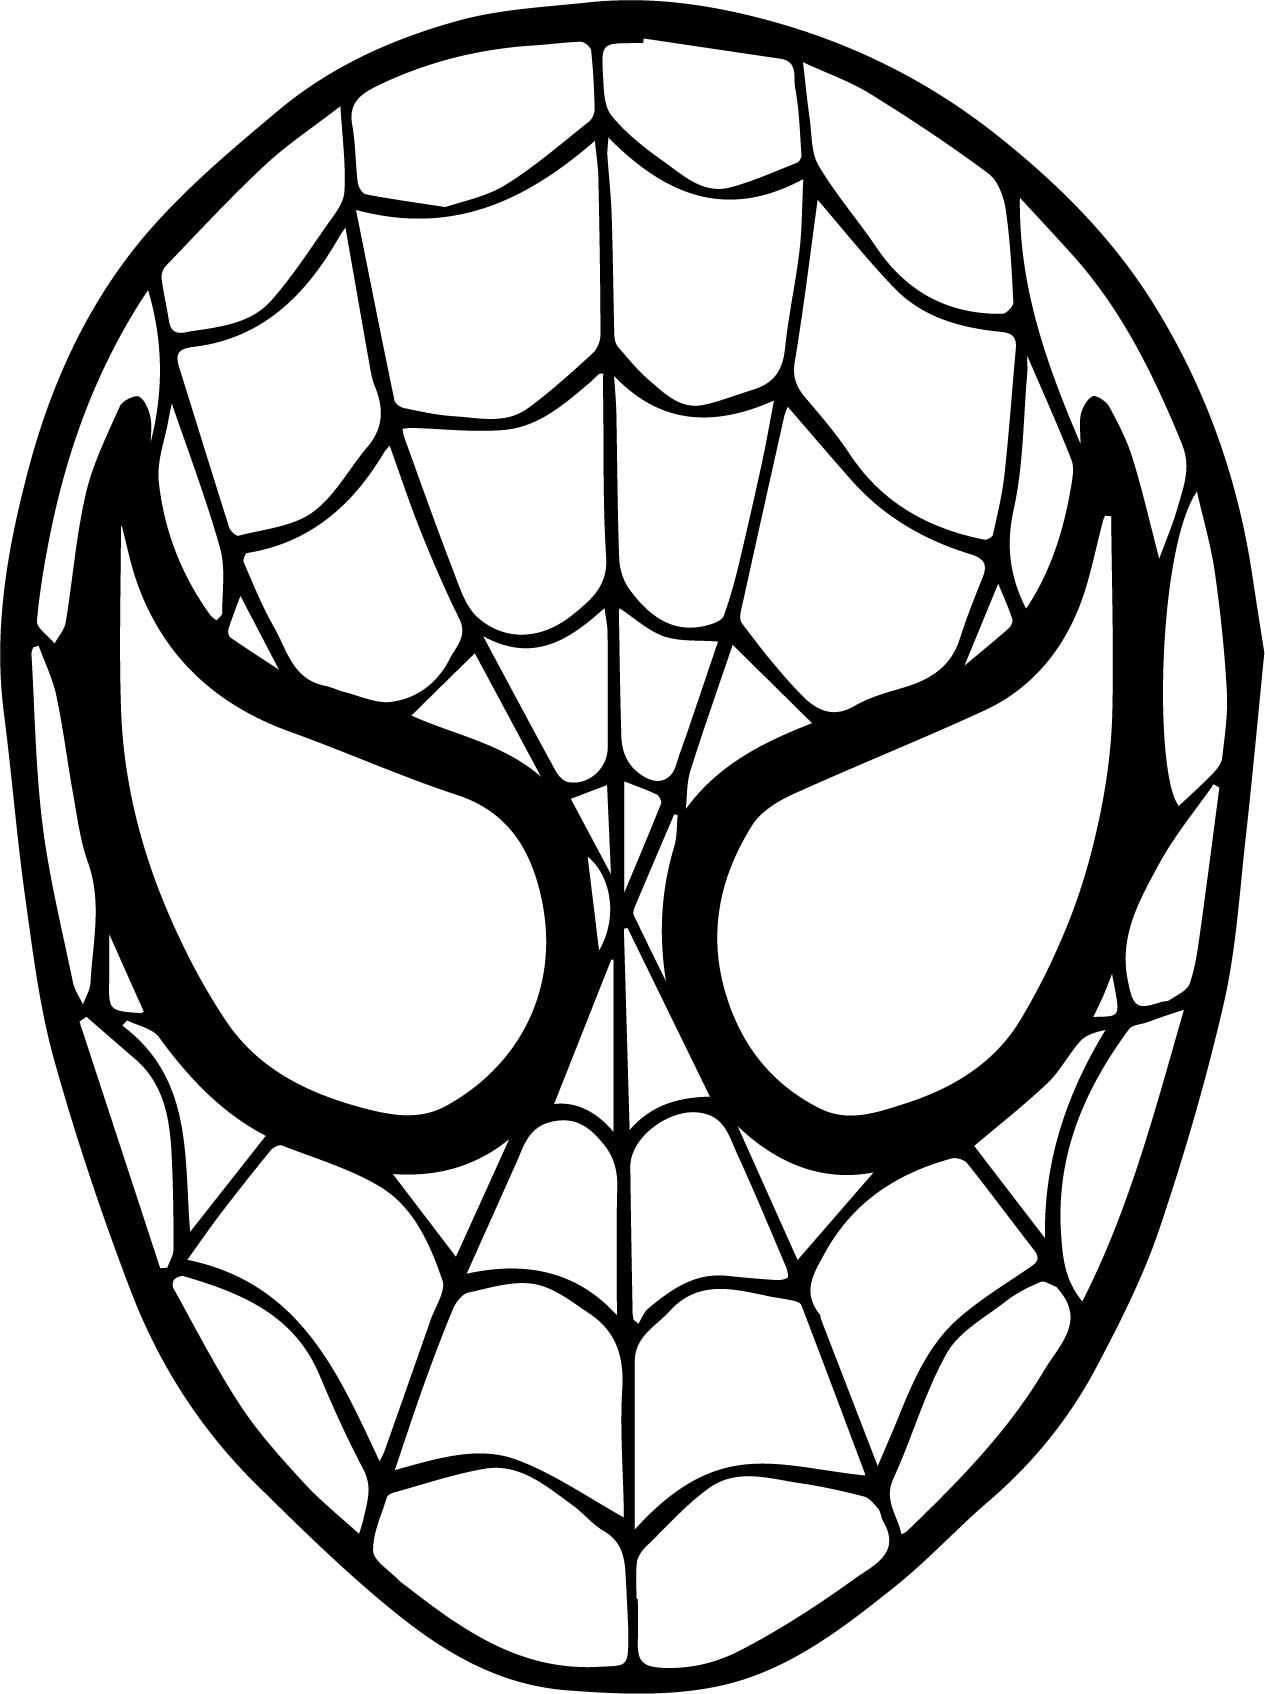 Spider man mask face coloring page